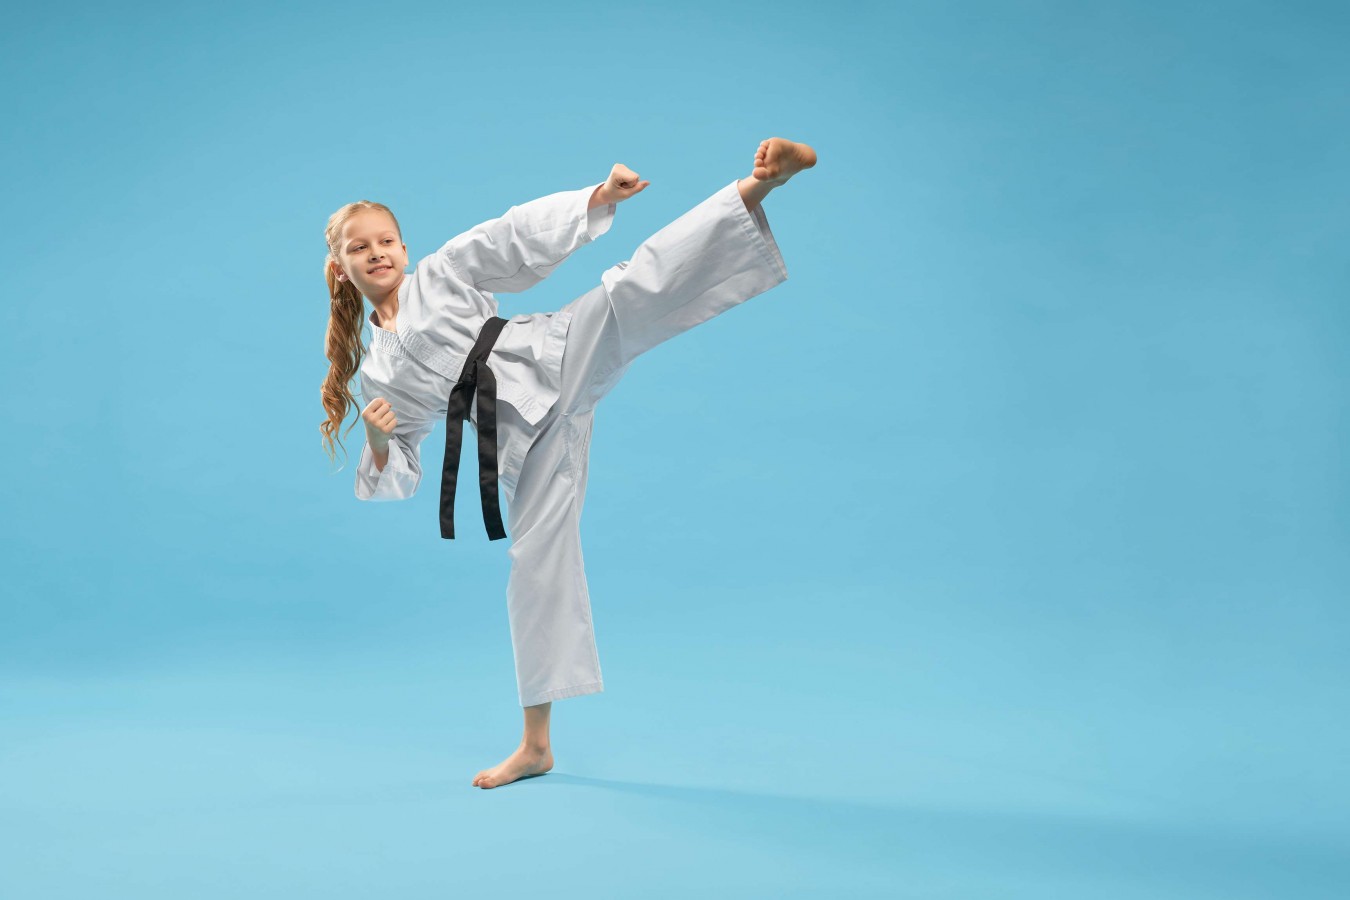 What Is Taekwondo? Definition, History, Rules, and More